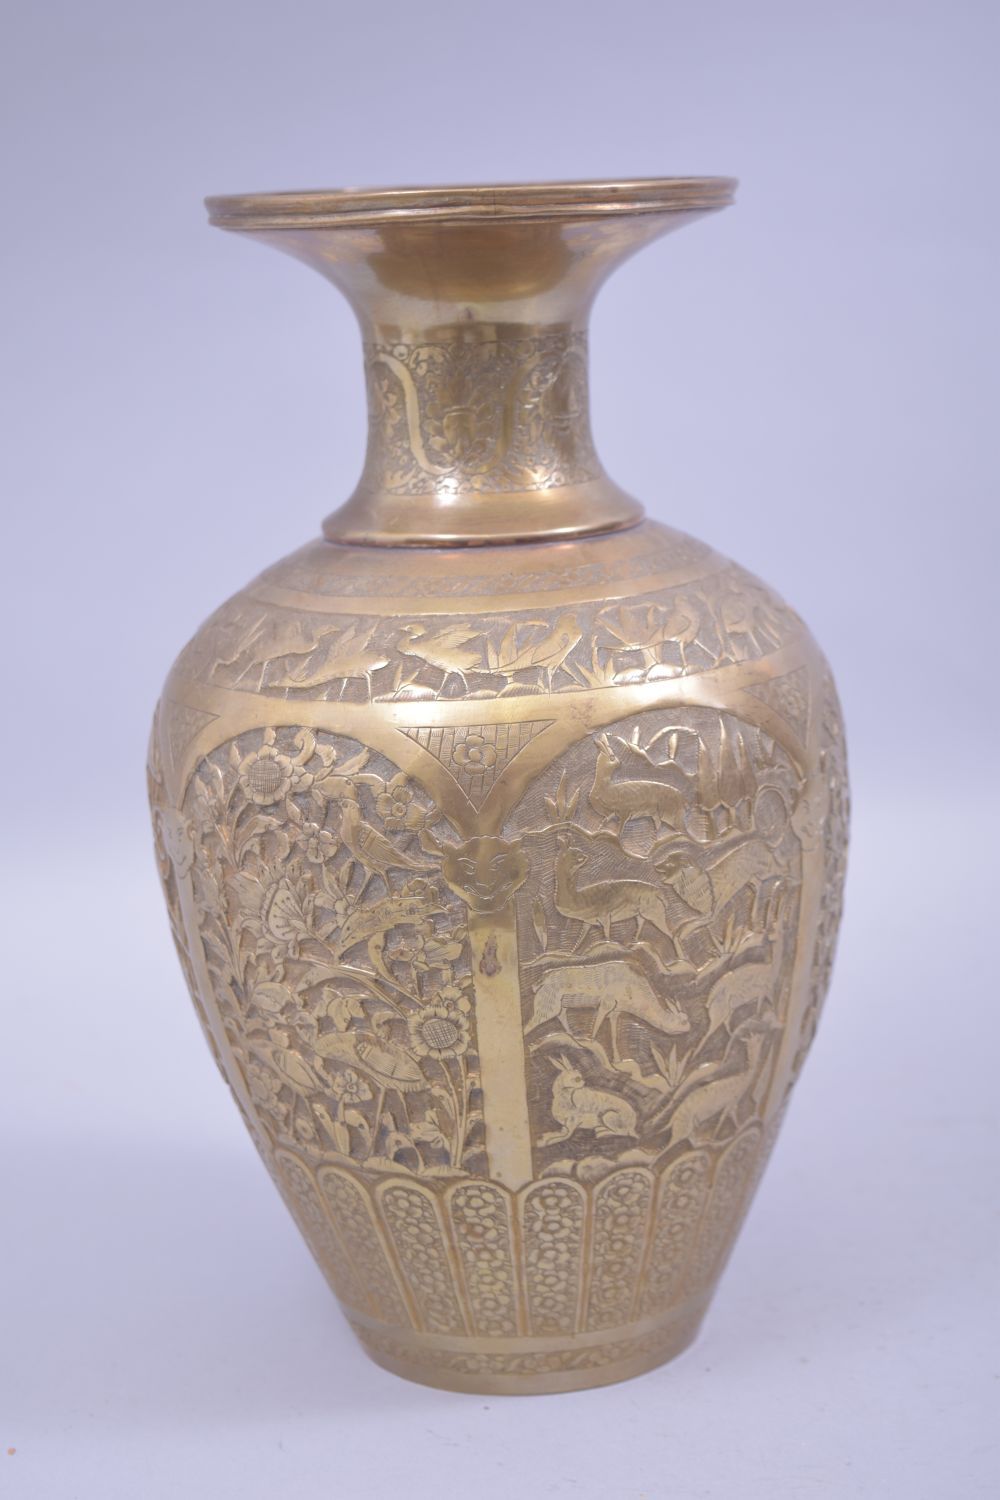 A PERSIAN BRASS RELIEF PANELLED VASE, with panels of animals amongst flora and birds, base soldered, - Image 4 of 6